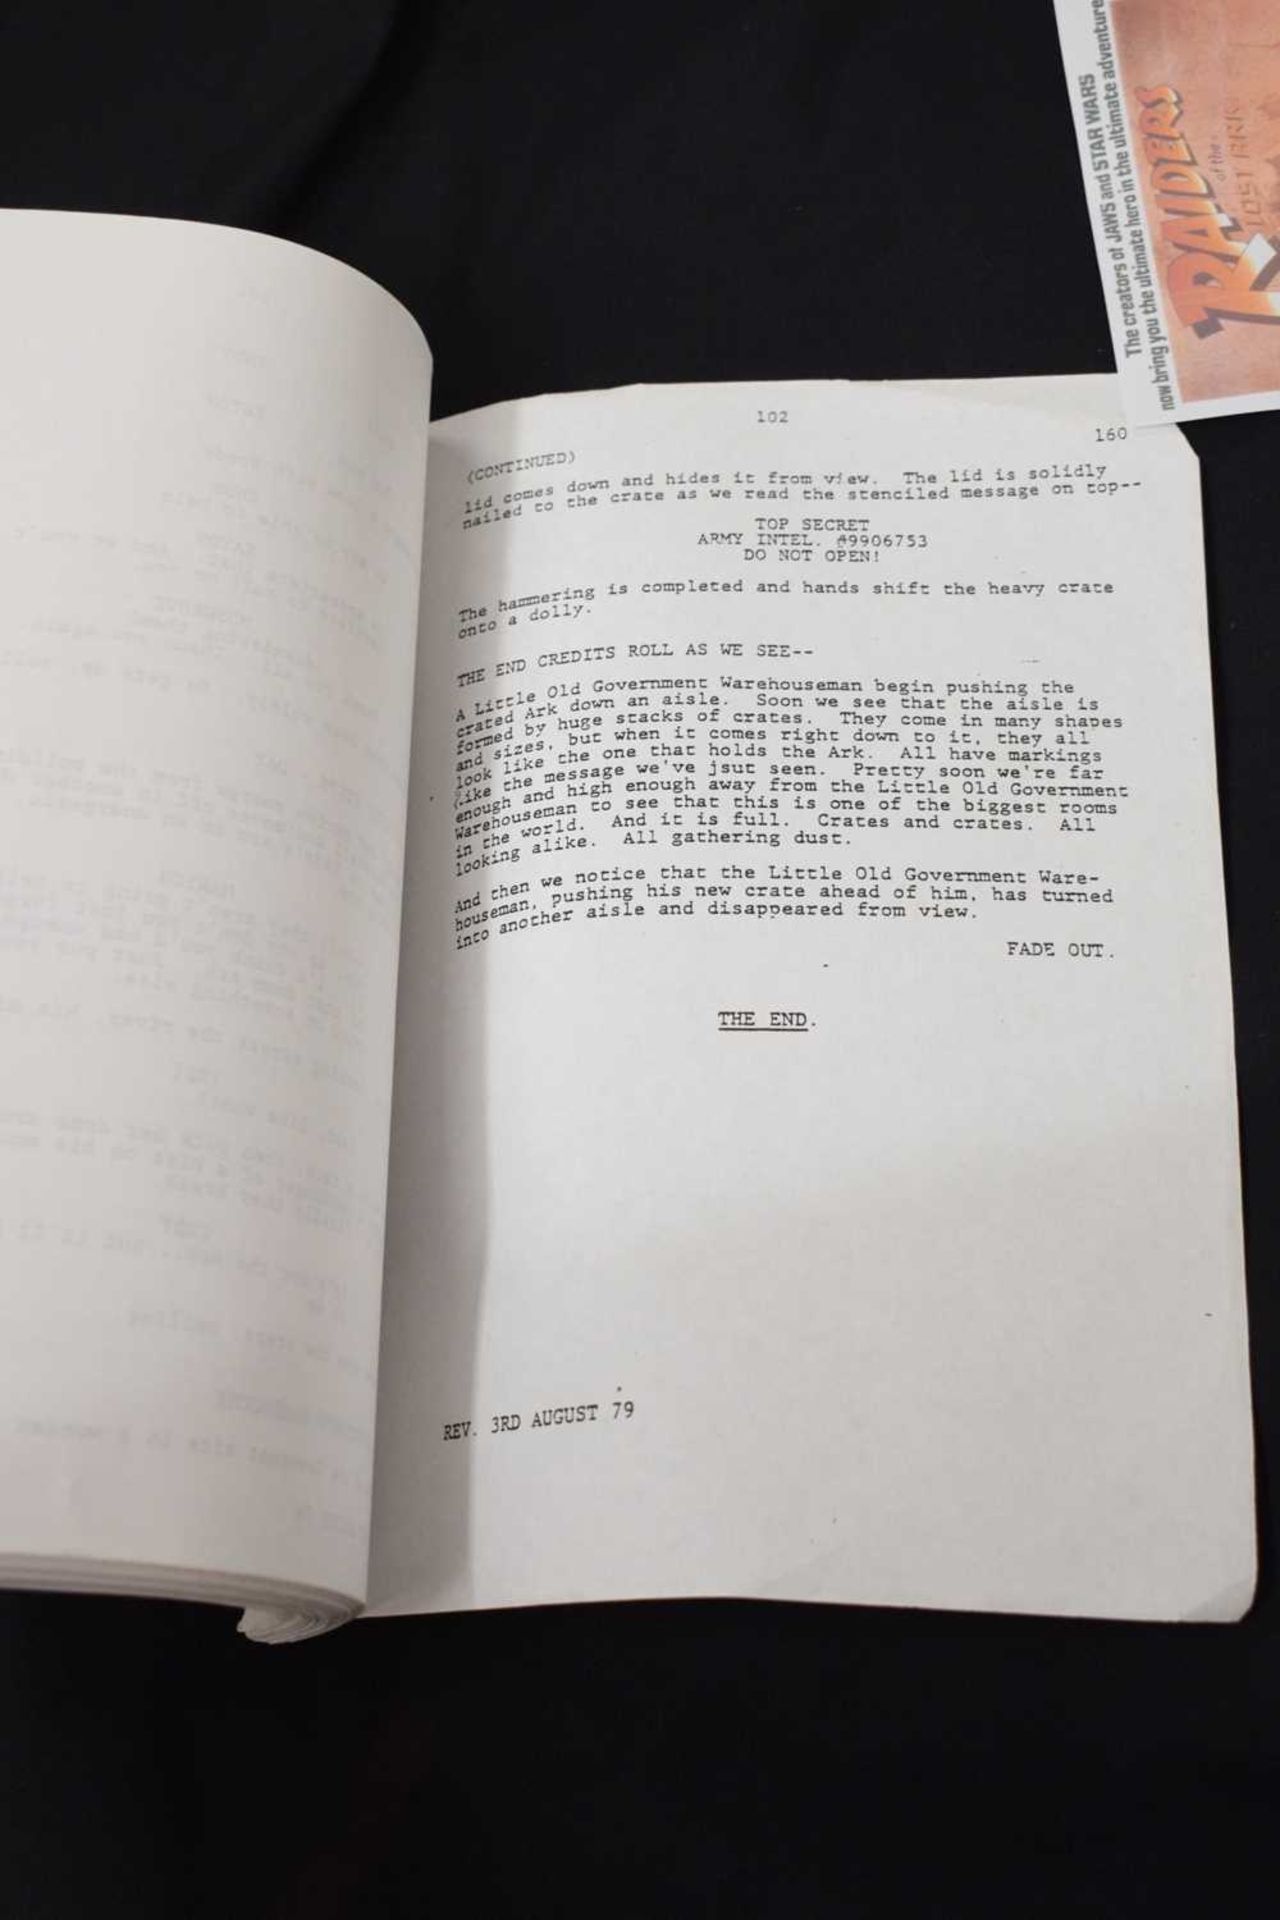 Raiders of the Lost Ark (1981) draft screenplay film script - third revised edition - Image 9 of 10